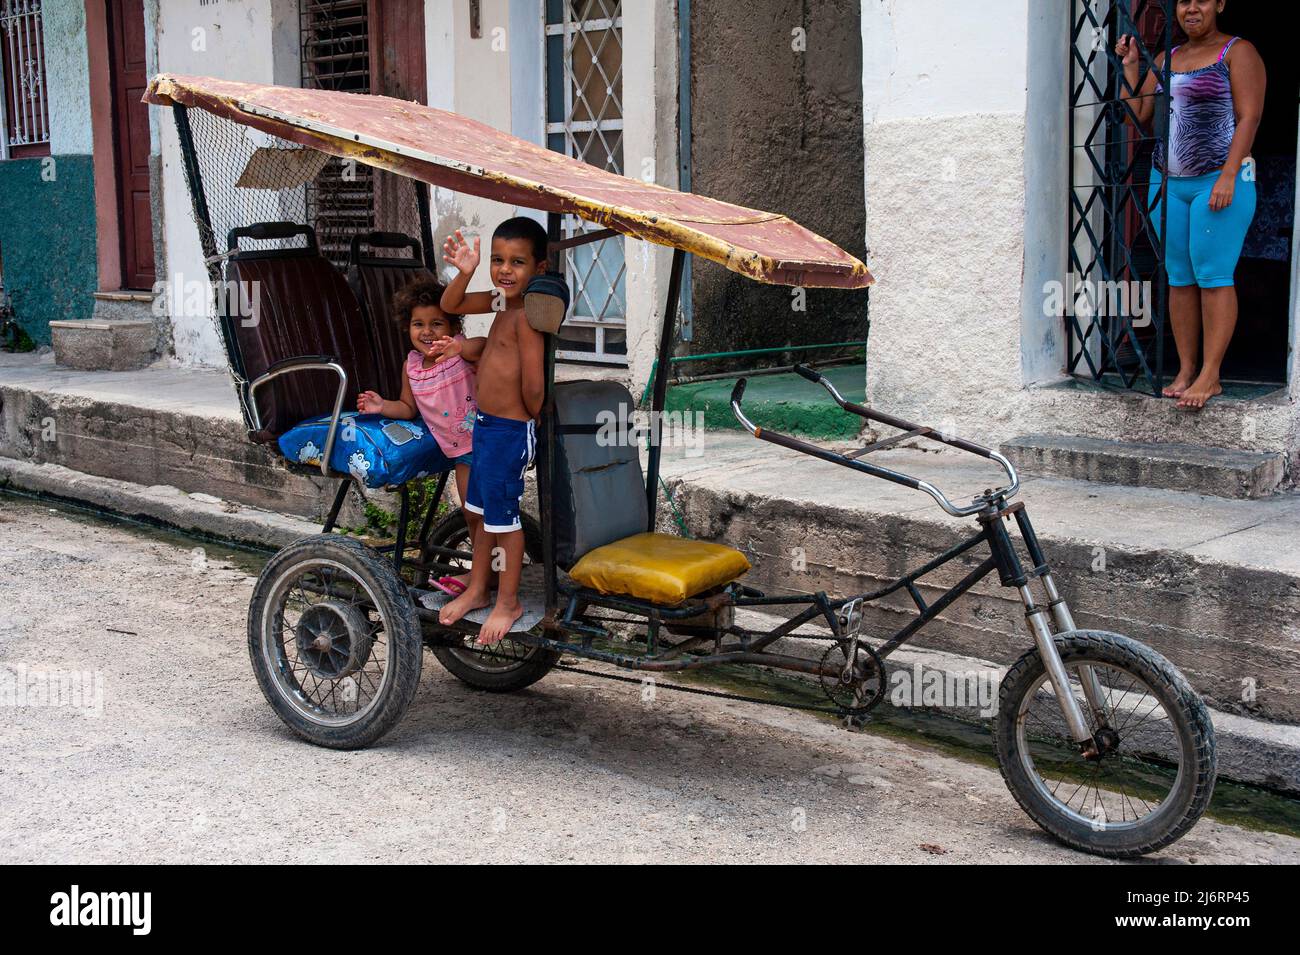 Young kids wave at the camera standing on a bicycle in front of their mother in Havana, Cuba. Stock Photo